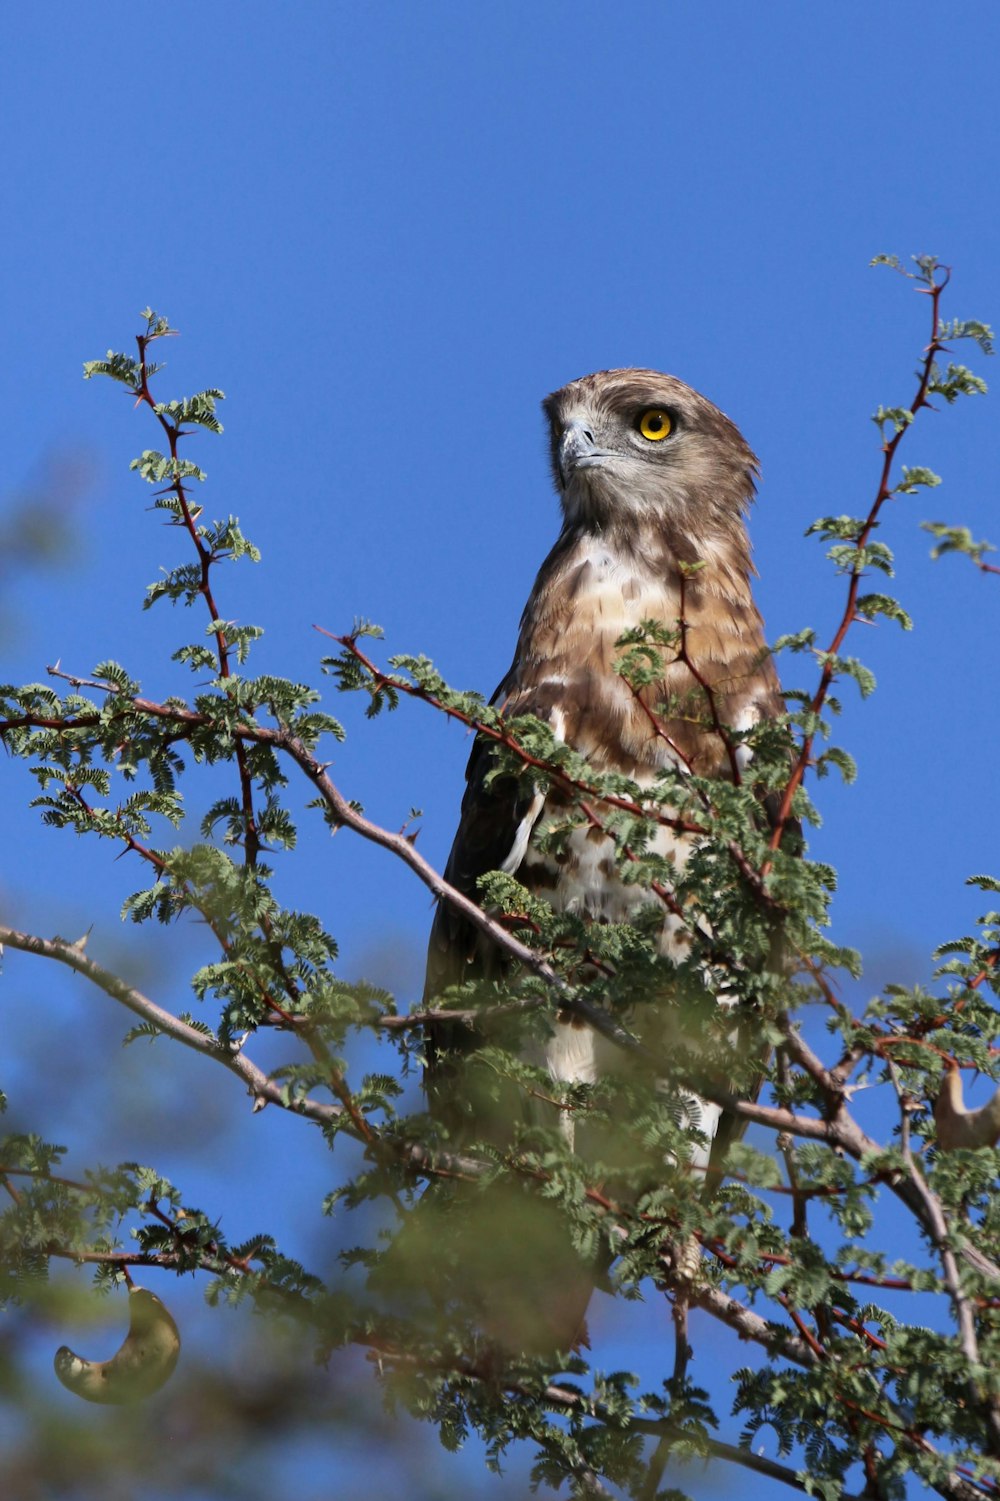 a bird perched on top of a tree branch